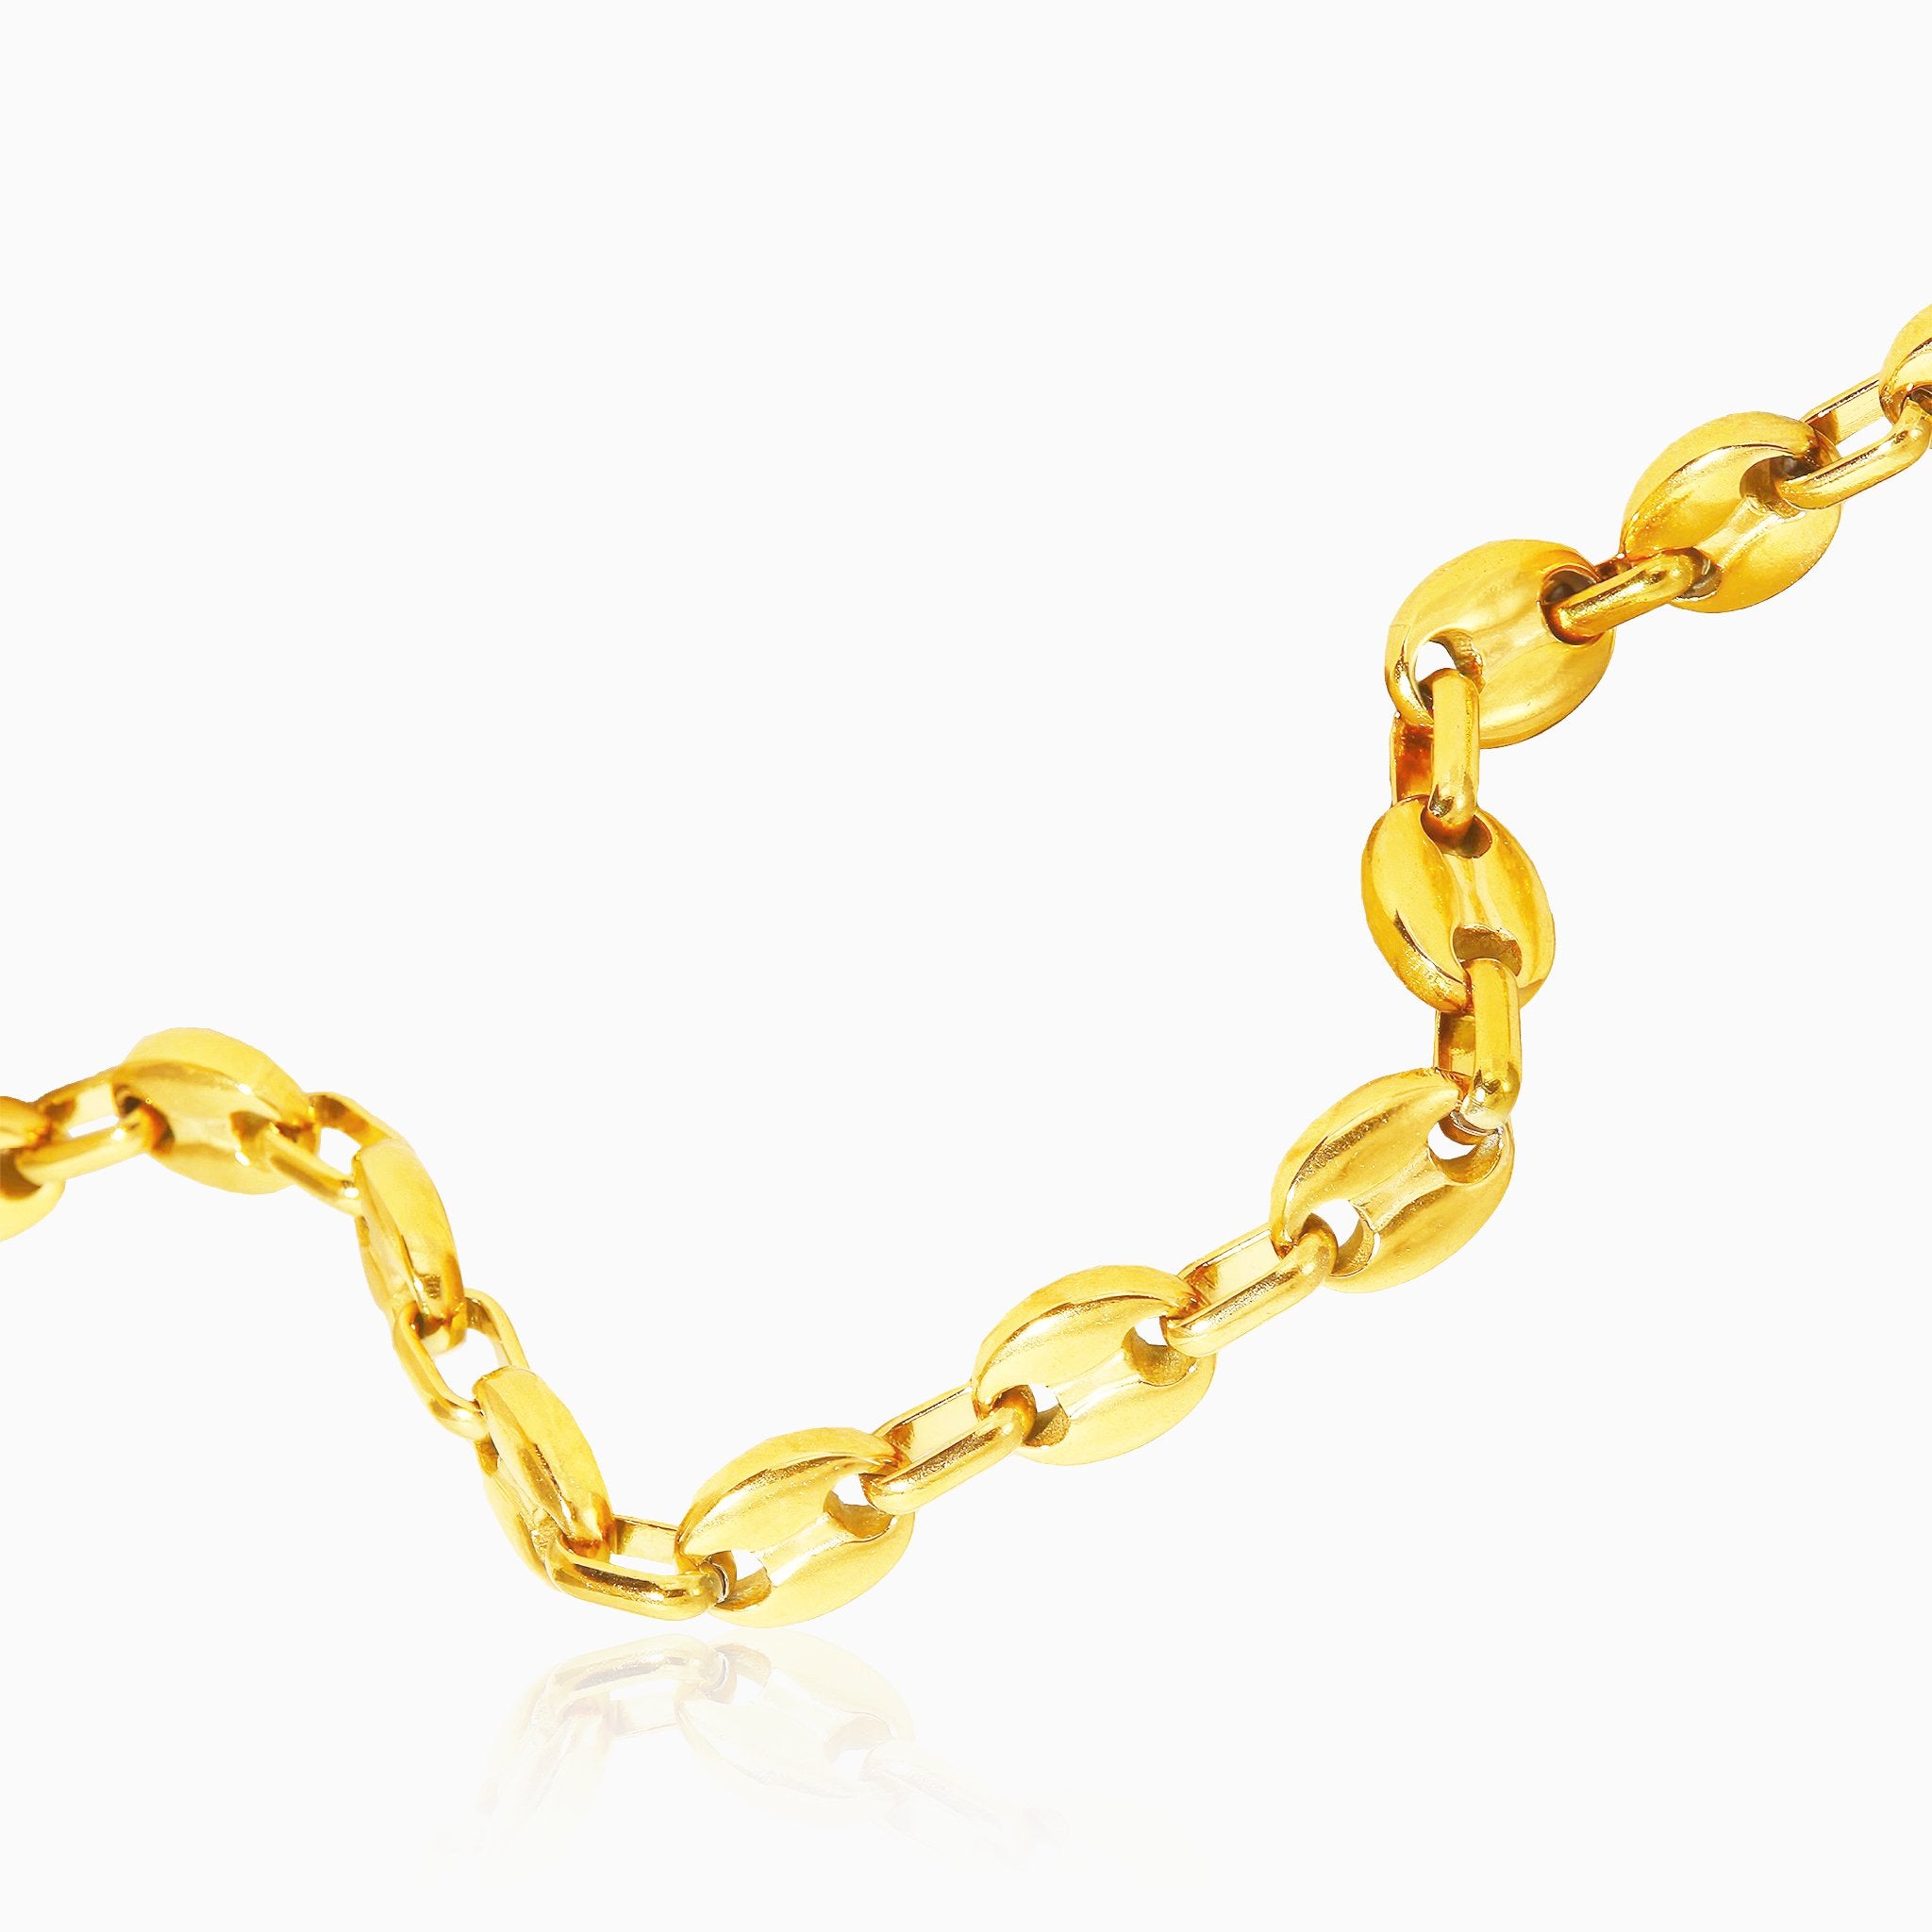 Pig Nose Buckle Anklet - Nobbier - Anklet - 18K Gold And Titanium PVD Coated Jewelry